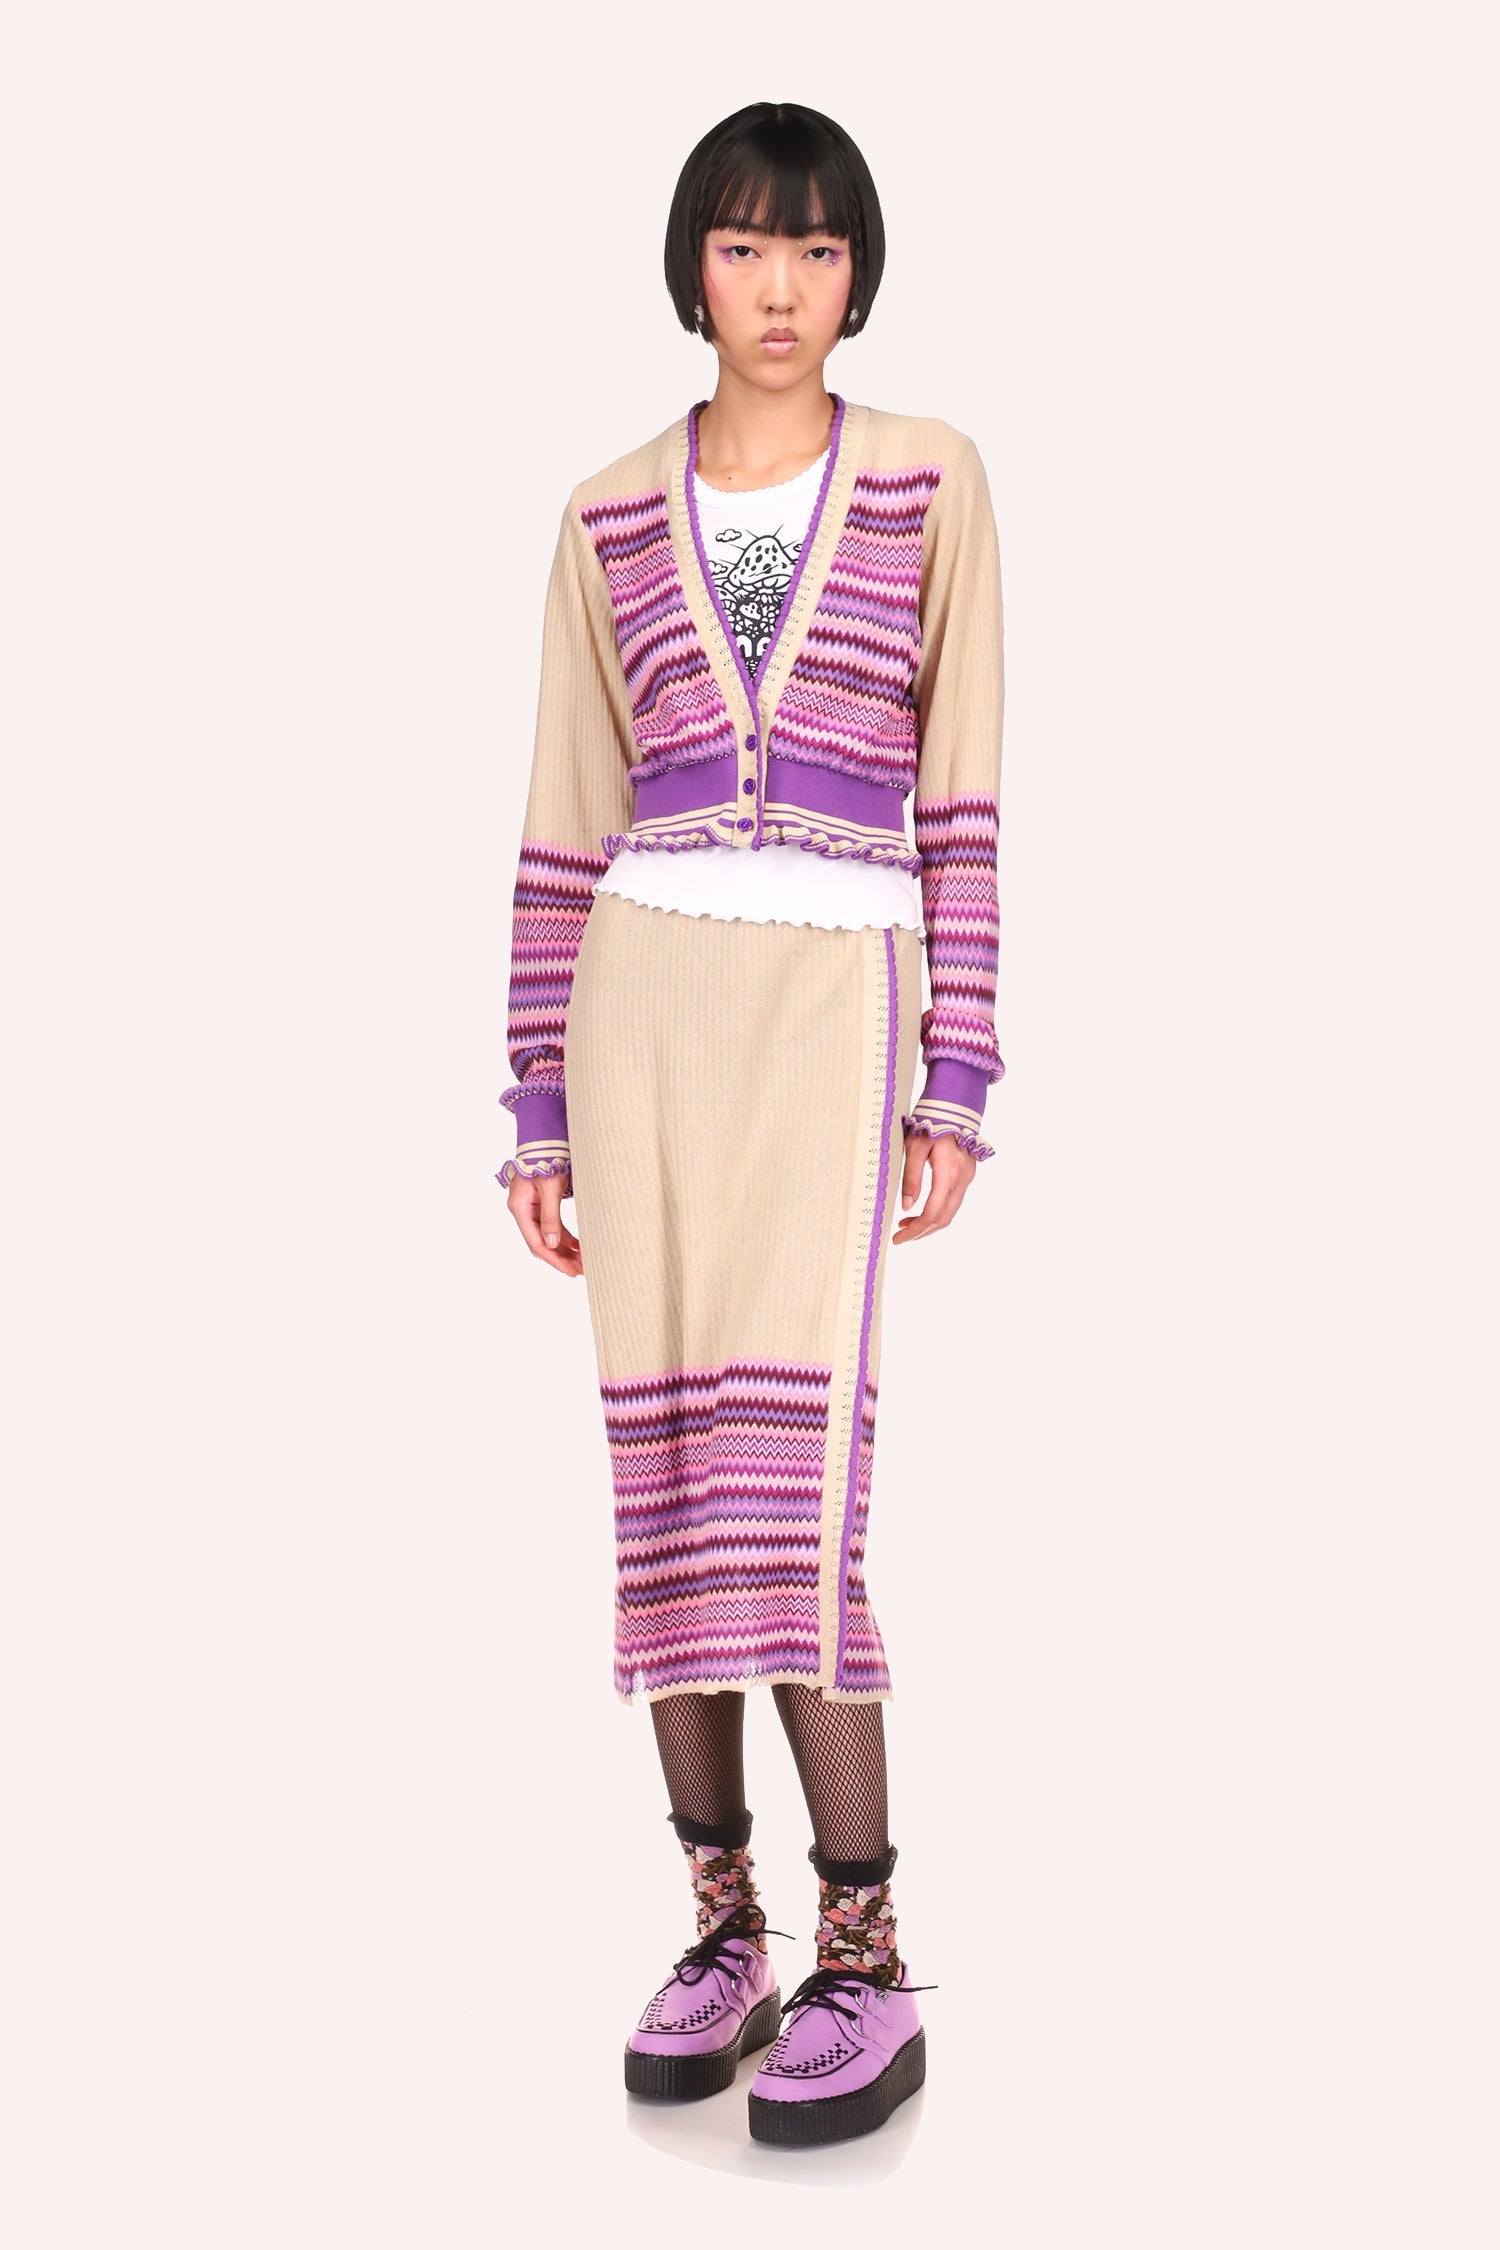 Tonal Zigzag Cropped Cardigan Lavender is a match with the Tonal Zigzag Skirt Lavender 